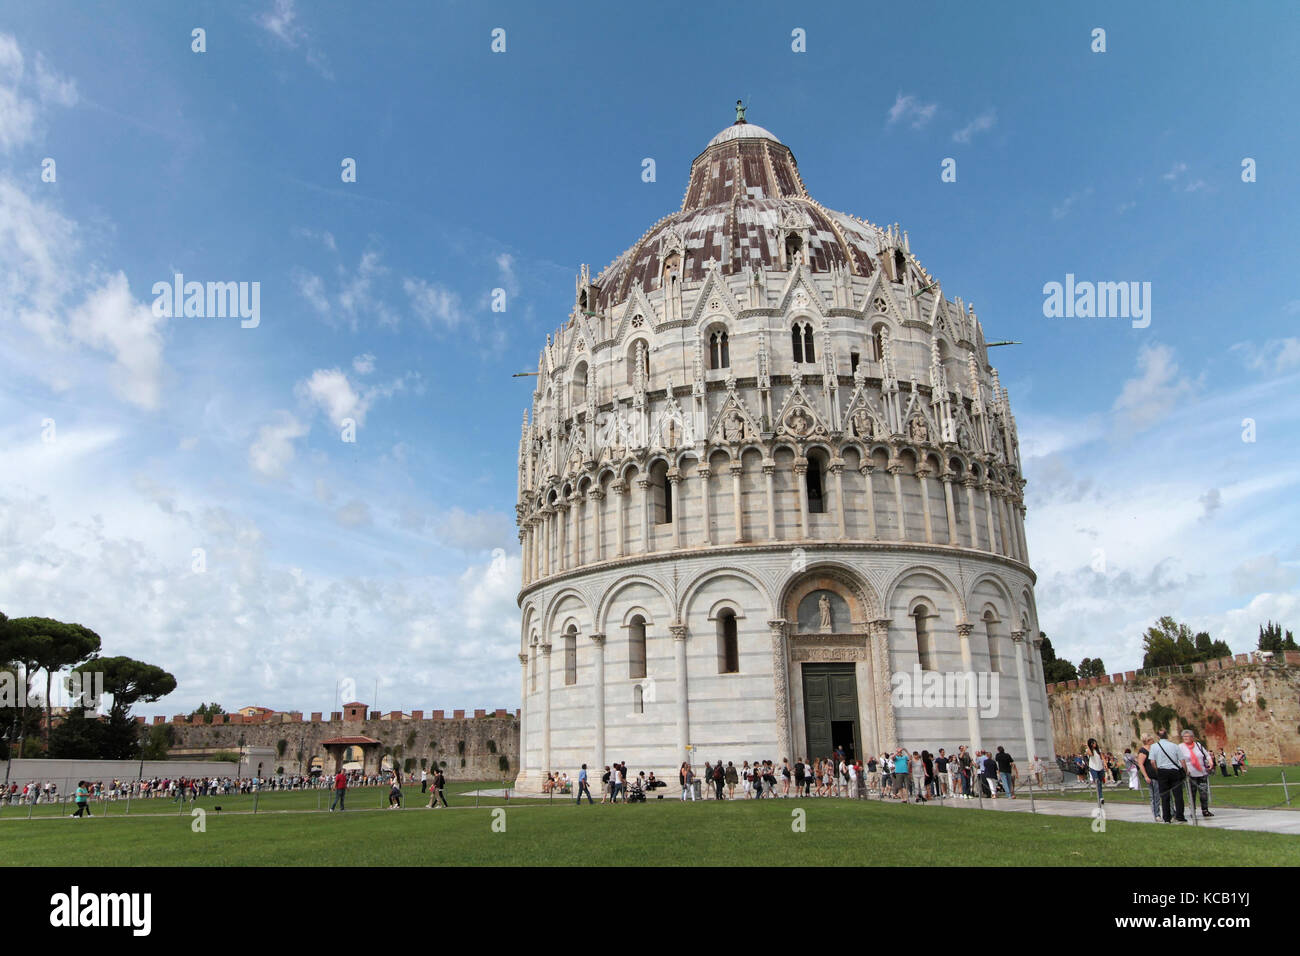 PISA, ITALY, September 15, 2015 : Pisa Baptistry of St. John on Piazza dei Miracoli. Piazza del Duomo is a wide walled area located in Pisa, Stock Photo